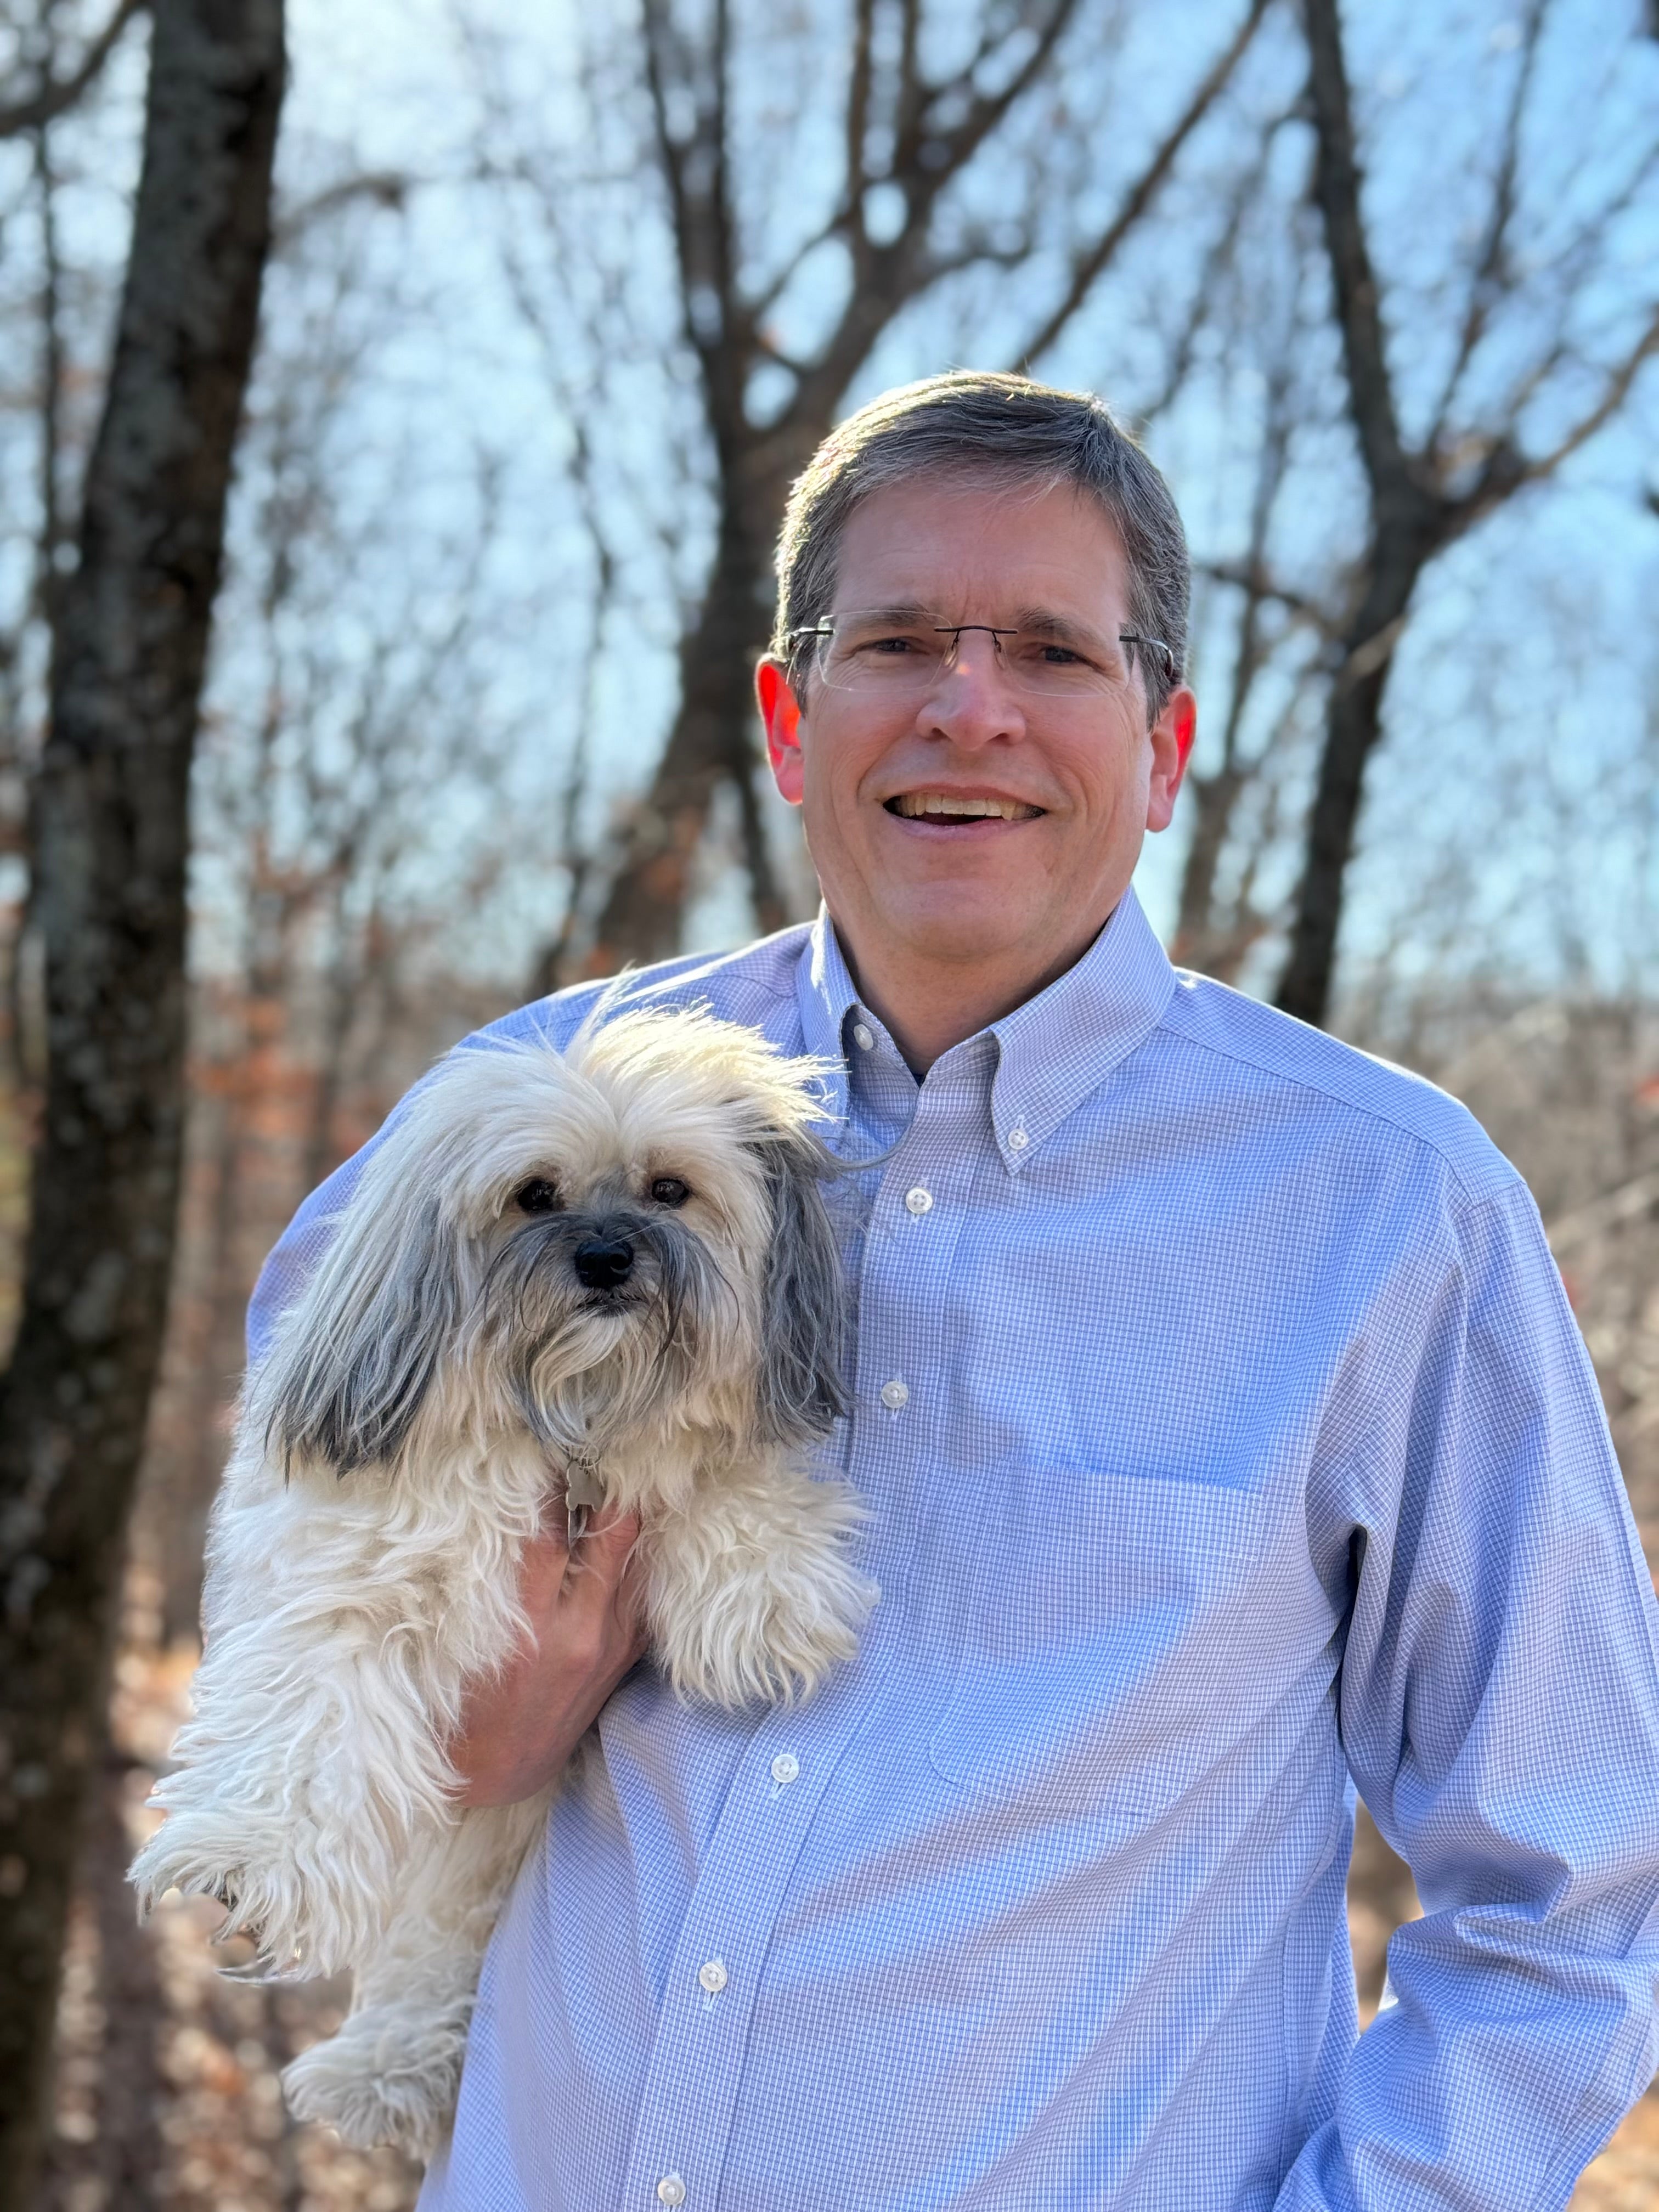 This image is of Bryan Monninger, Vice President of Vet Sales and Marketing at YuMOVE, with a small fluffy white dog in front of trees.